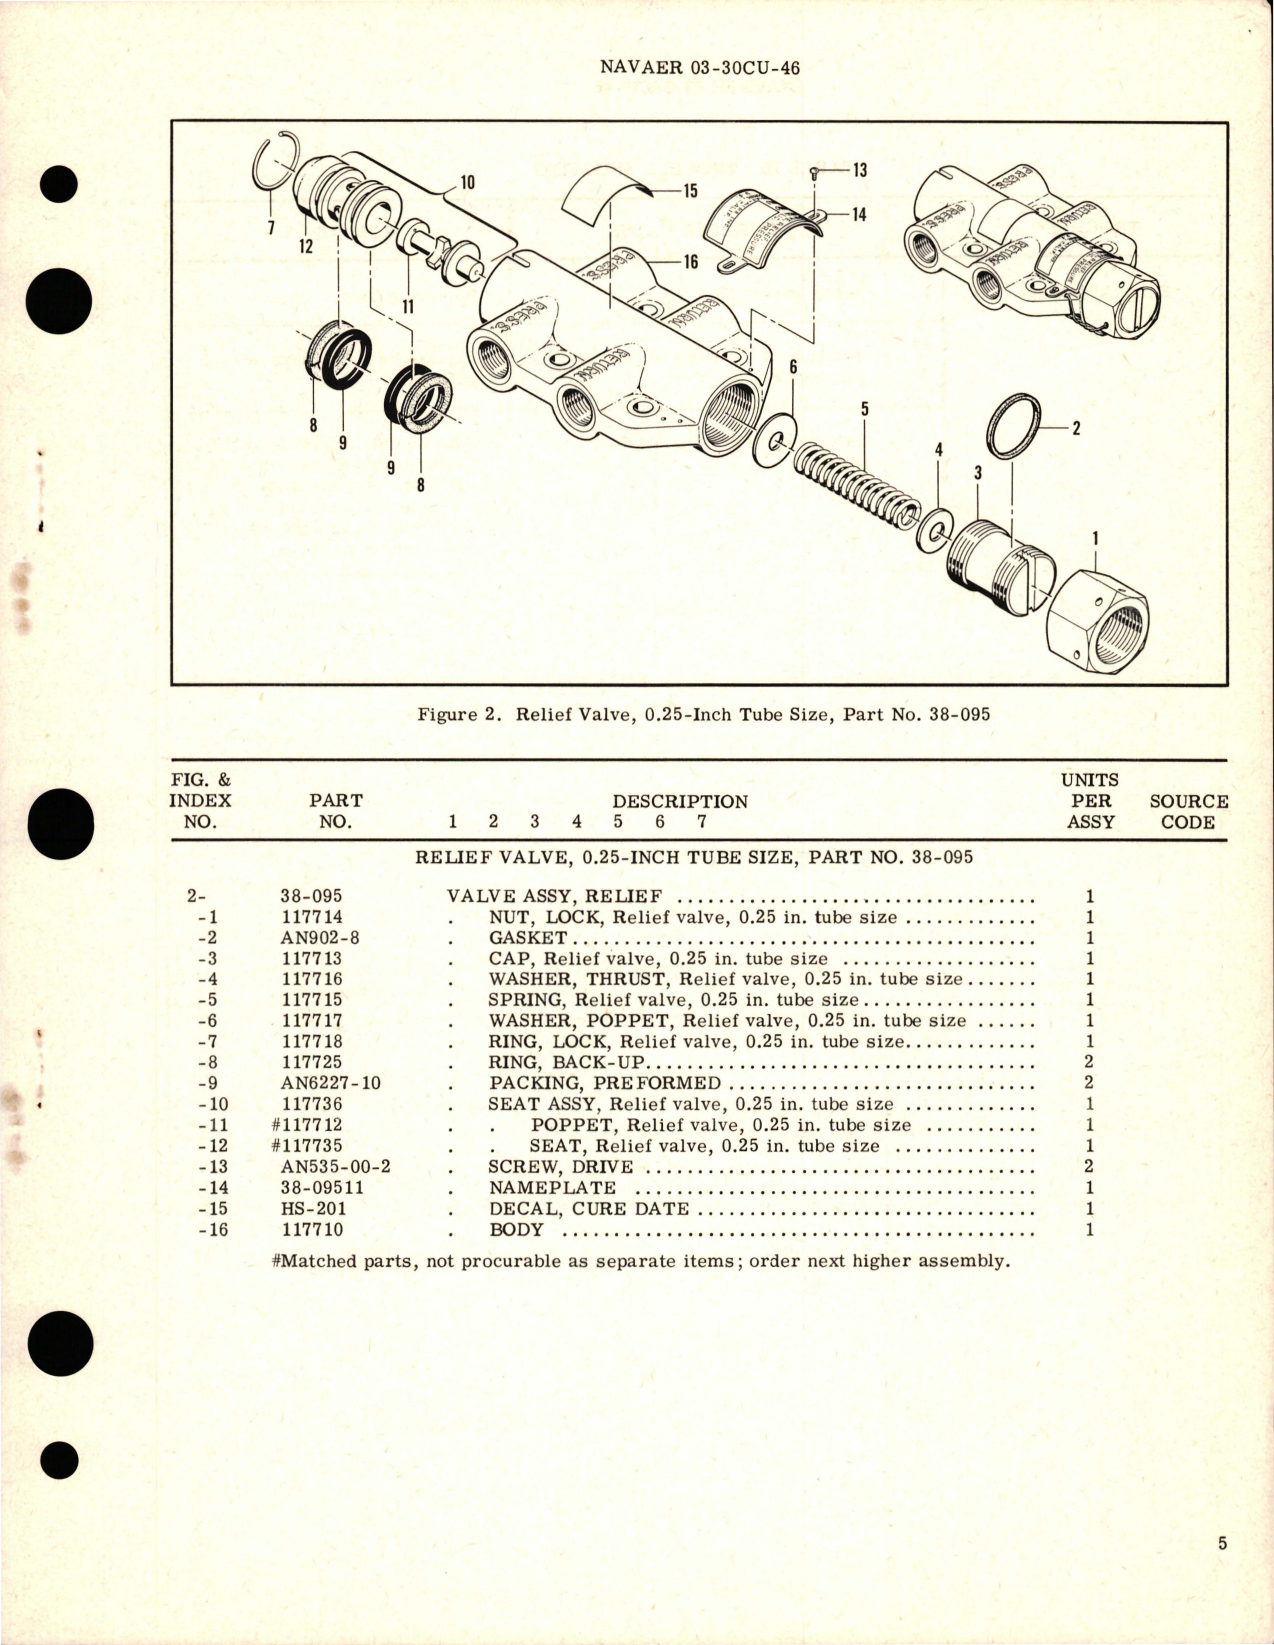 Sample page 5 from AirCorps Library document: Overhaul Instructions with Parts Breakdown for Relief Valve 0.25 inch Tube Size - Part 38-095